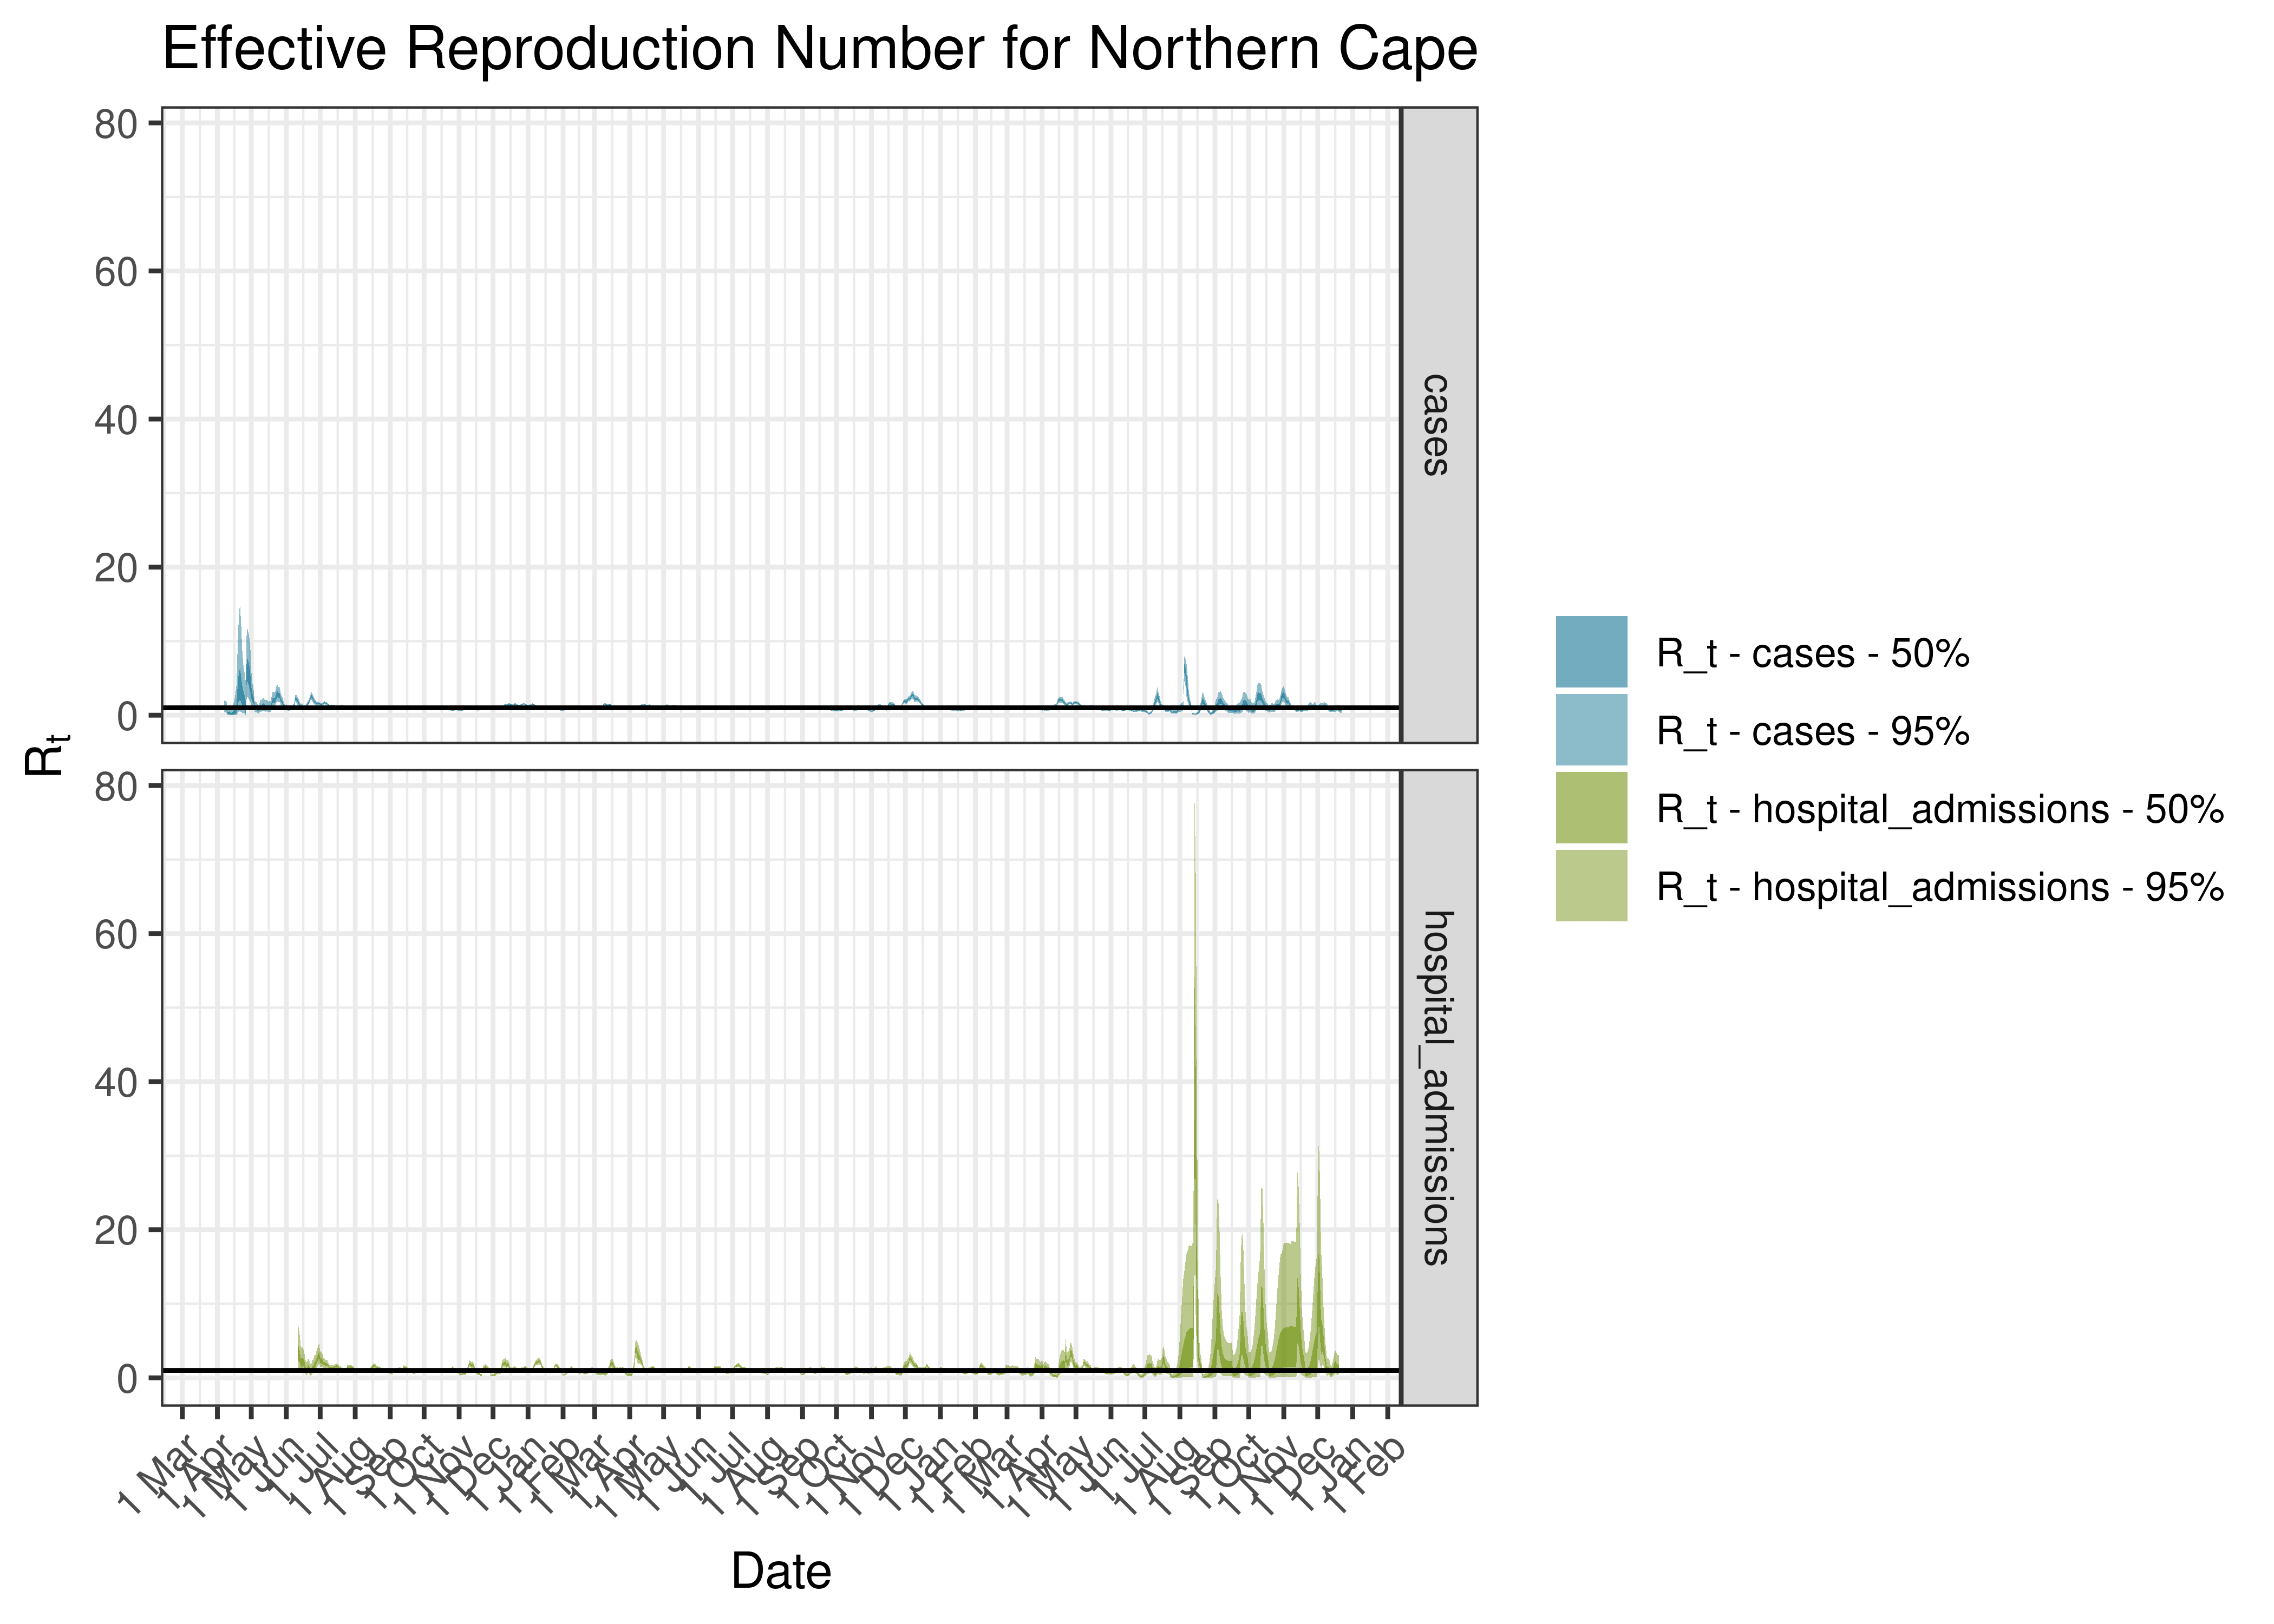 Estimated Effective Reproduction Number for Northern Cape since 1 April 2020